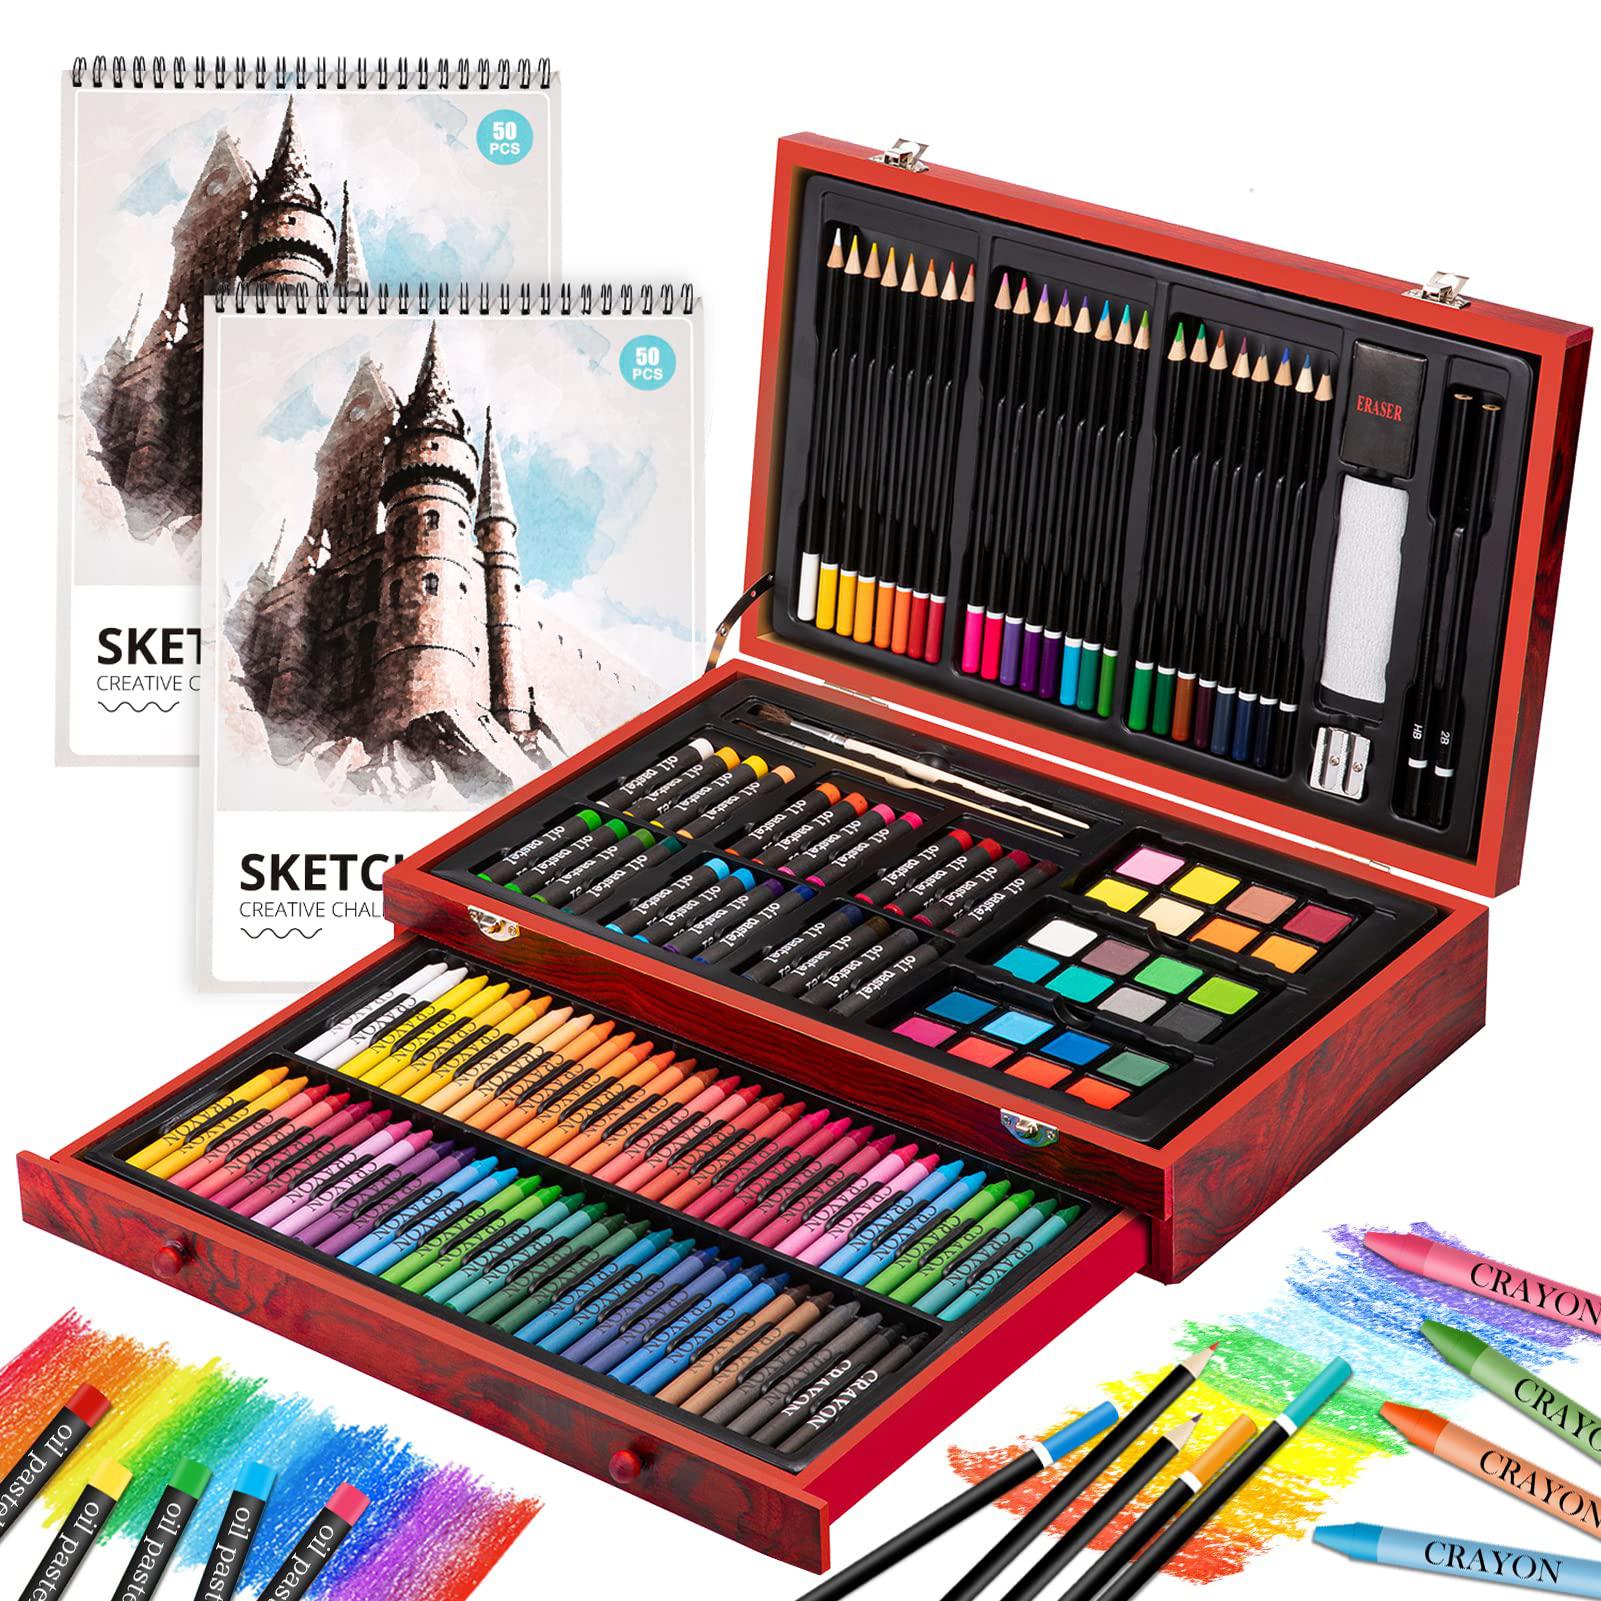 POPYOLA popyola art supplies, deluxe wood art set for artist, various  painting supplies, including crayons, colored pencils, oil past